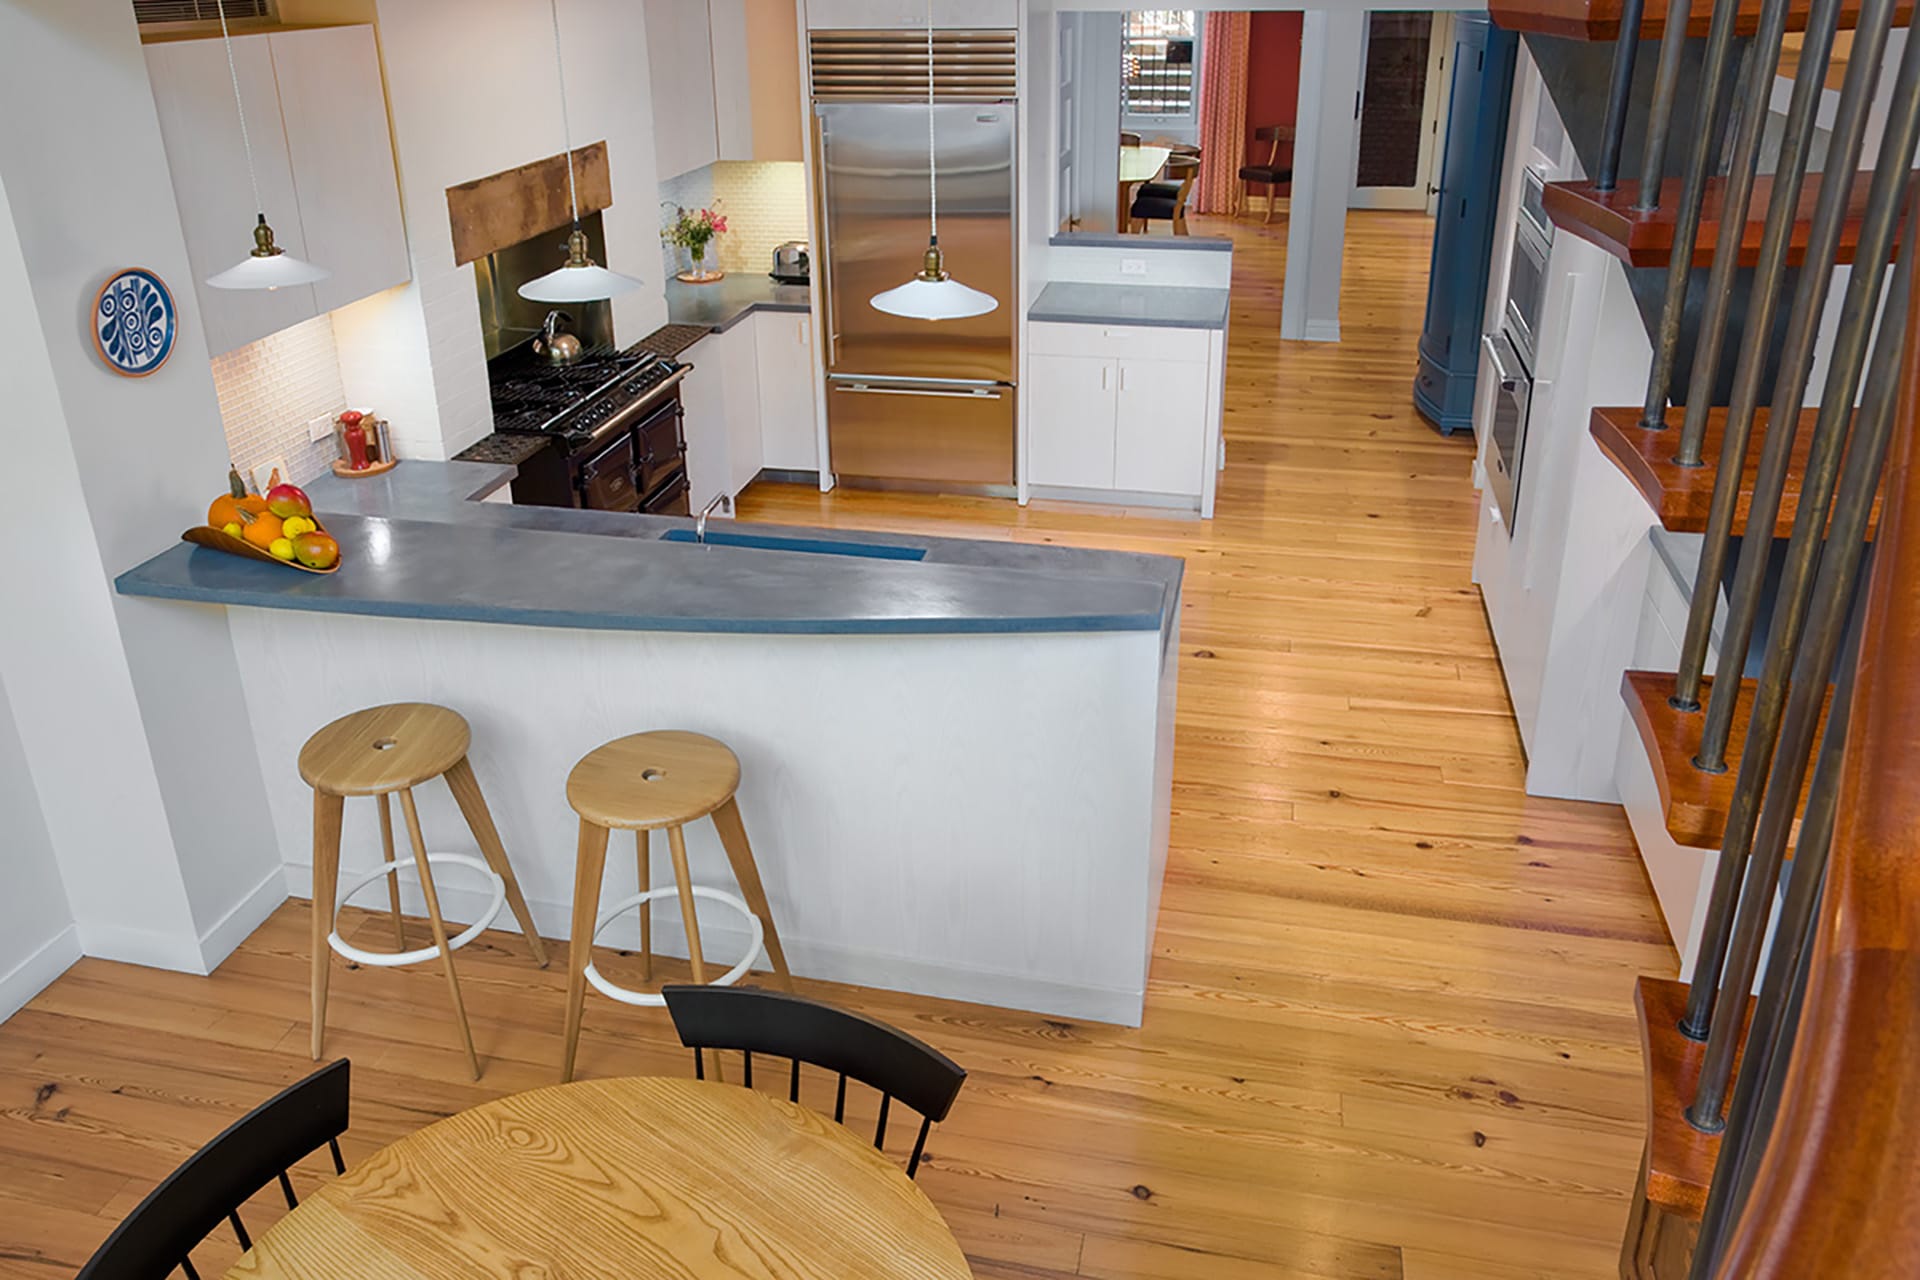 View from staircase of the kitchen in the middle of a Cobble Hill home with blue countertops and white cabinetry.